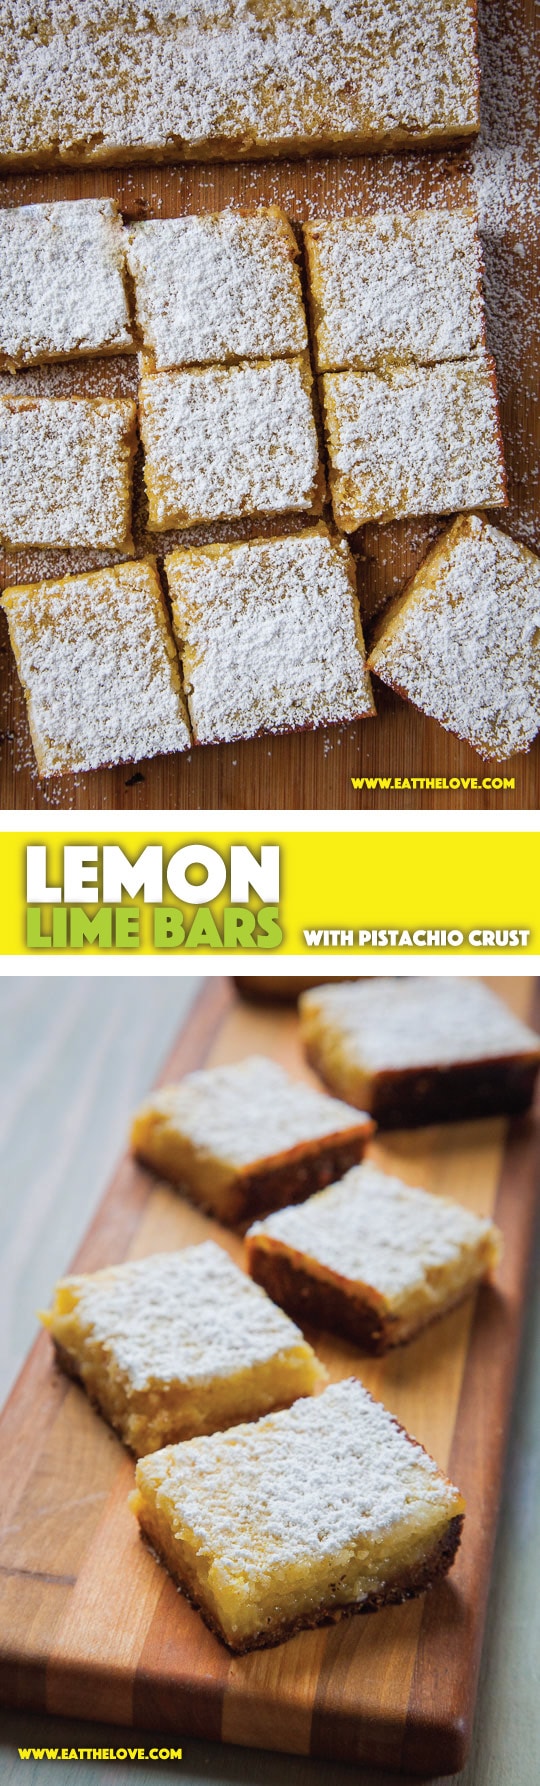 Easy-to-Make Lemon Lime Bars with Pistachio Crust. Photo and recipe by Irvin Lin of Eat the Love.